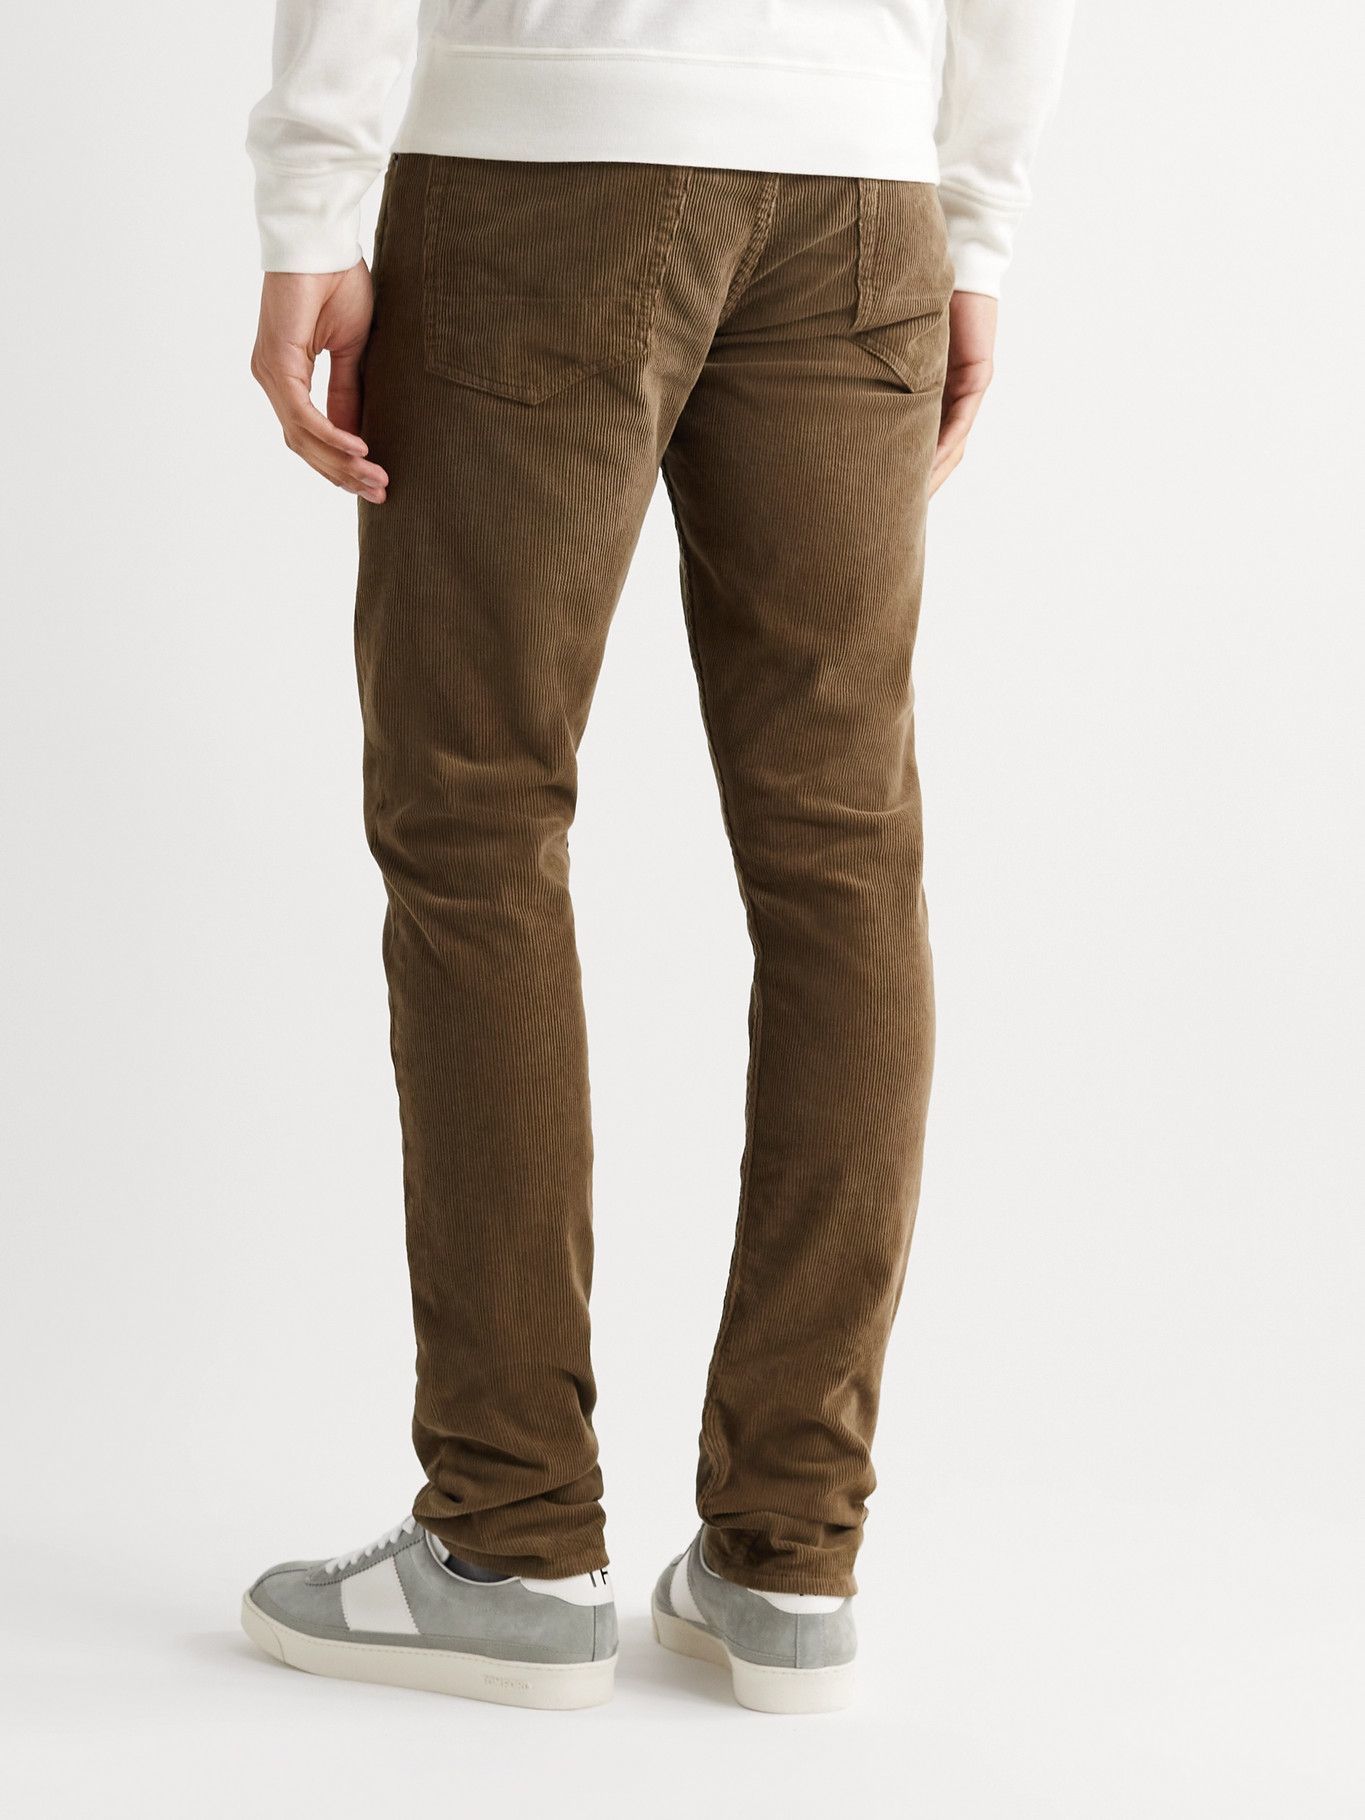 TOM FORD - Slim-Fit Cotton-Blend Corduroy Trousers - Brown TOM FORD